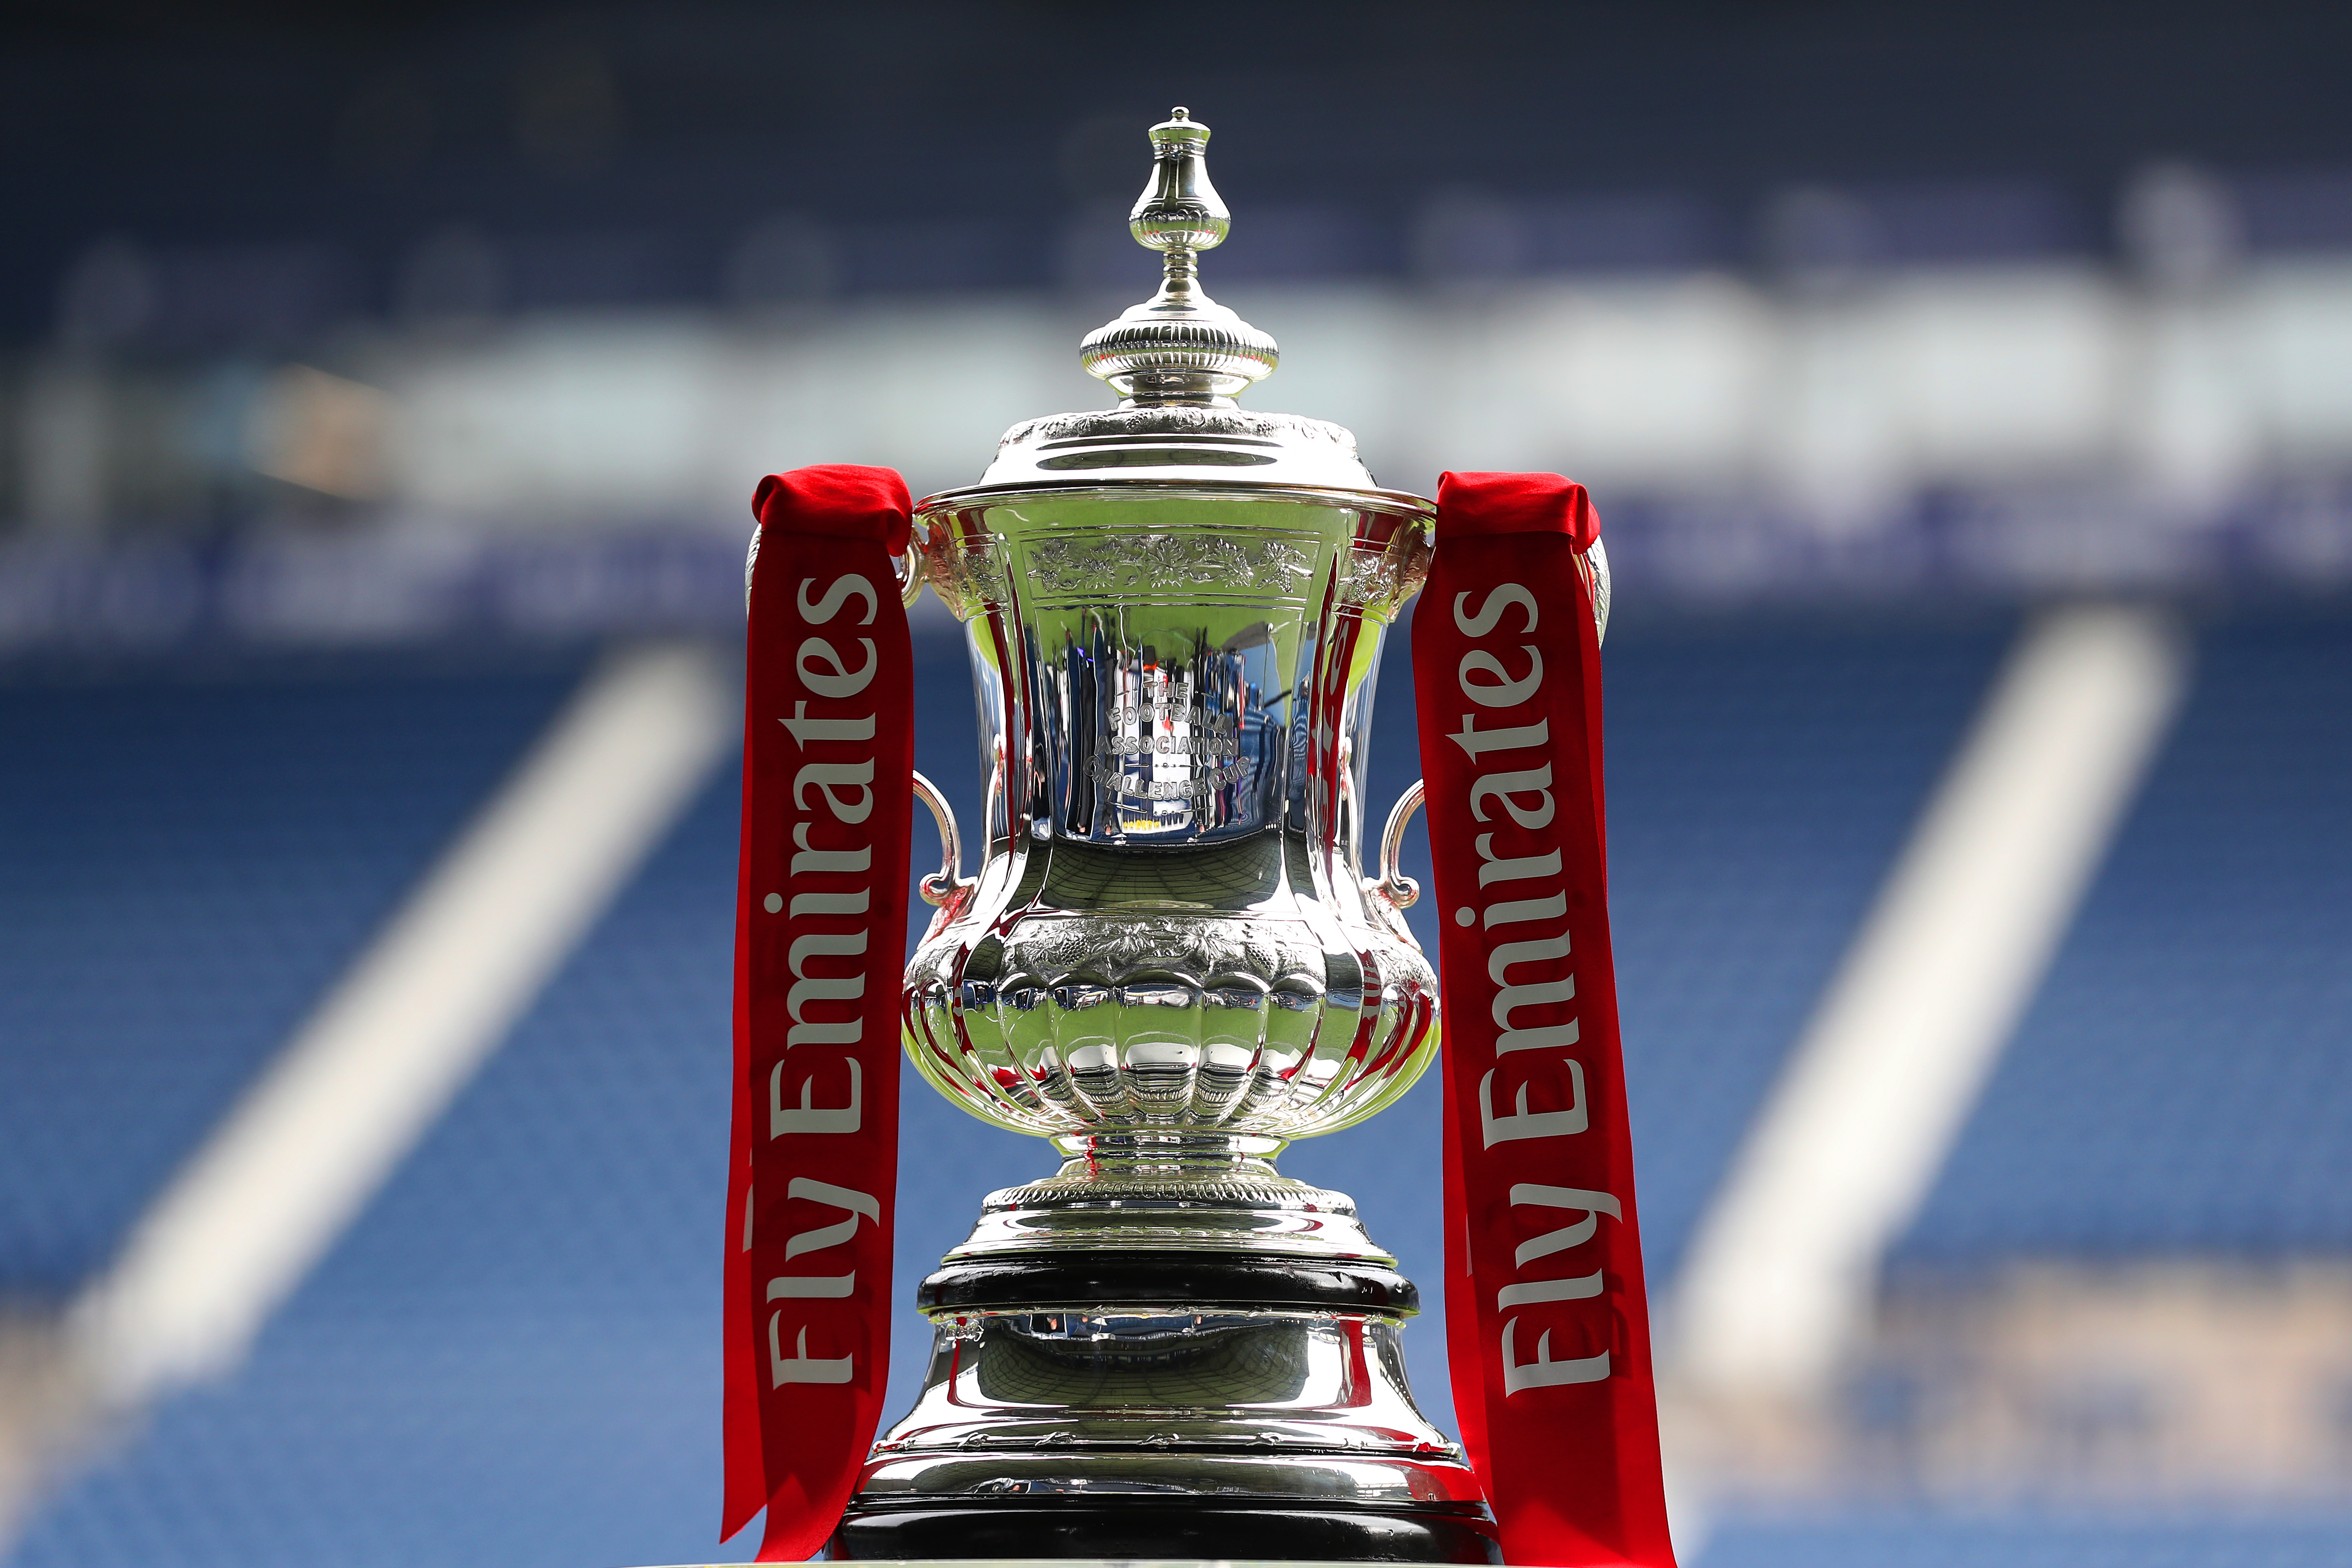 An image of the Emirates FA Cup trophy